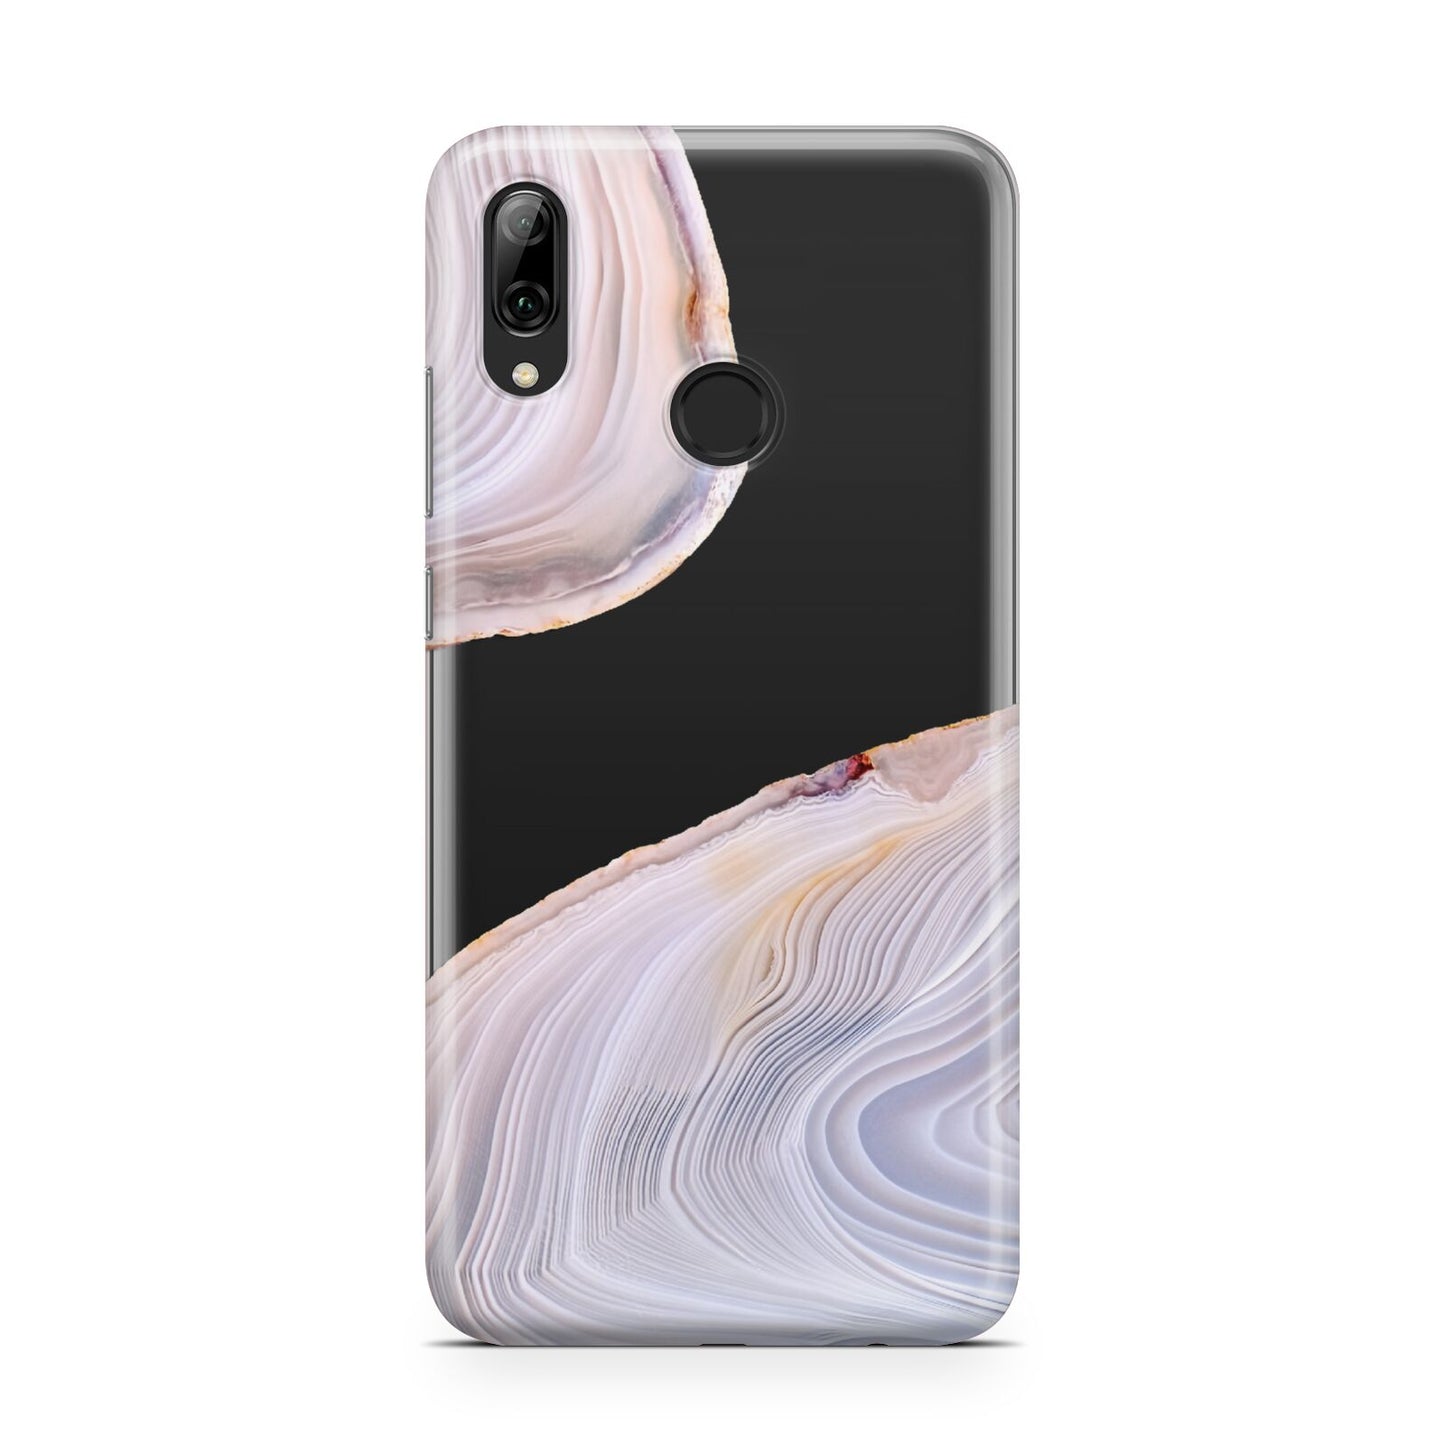 Agate Pale Pink and Blue Huawei Y7 2019